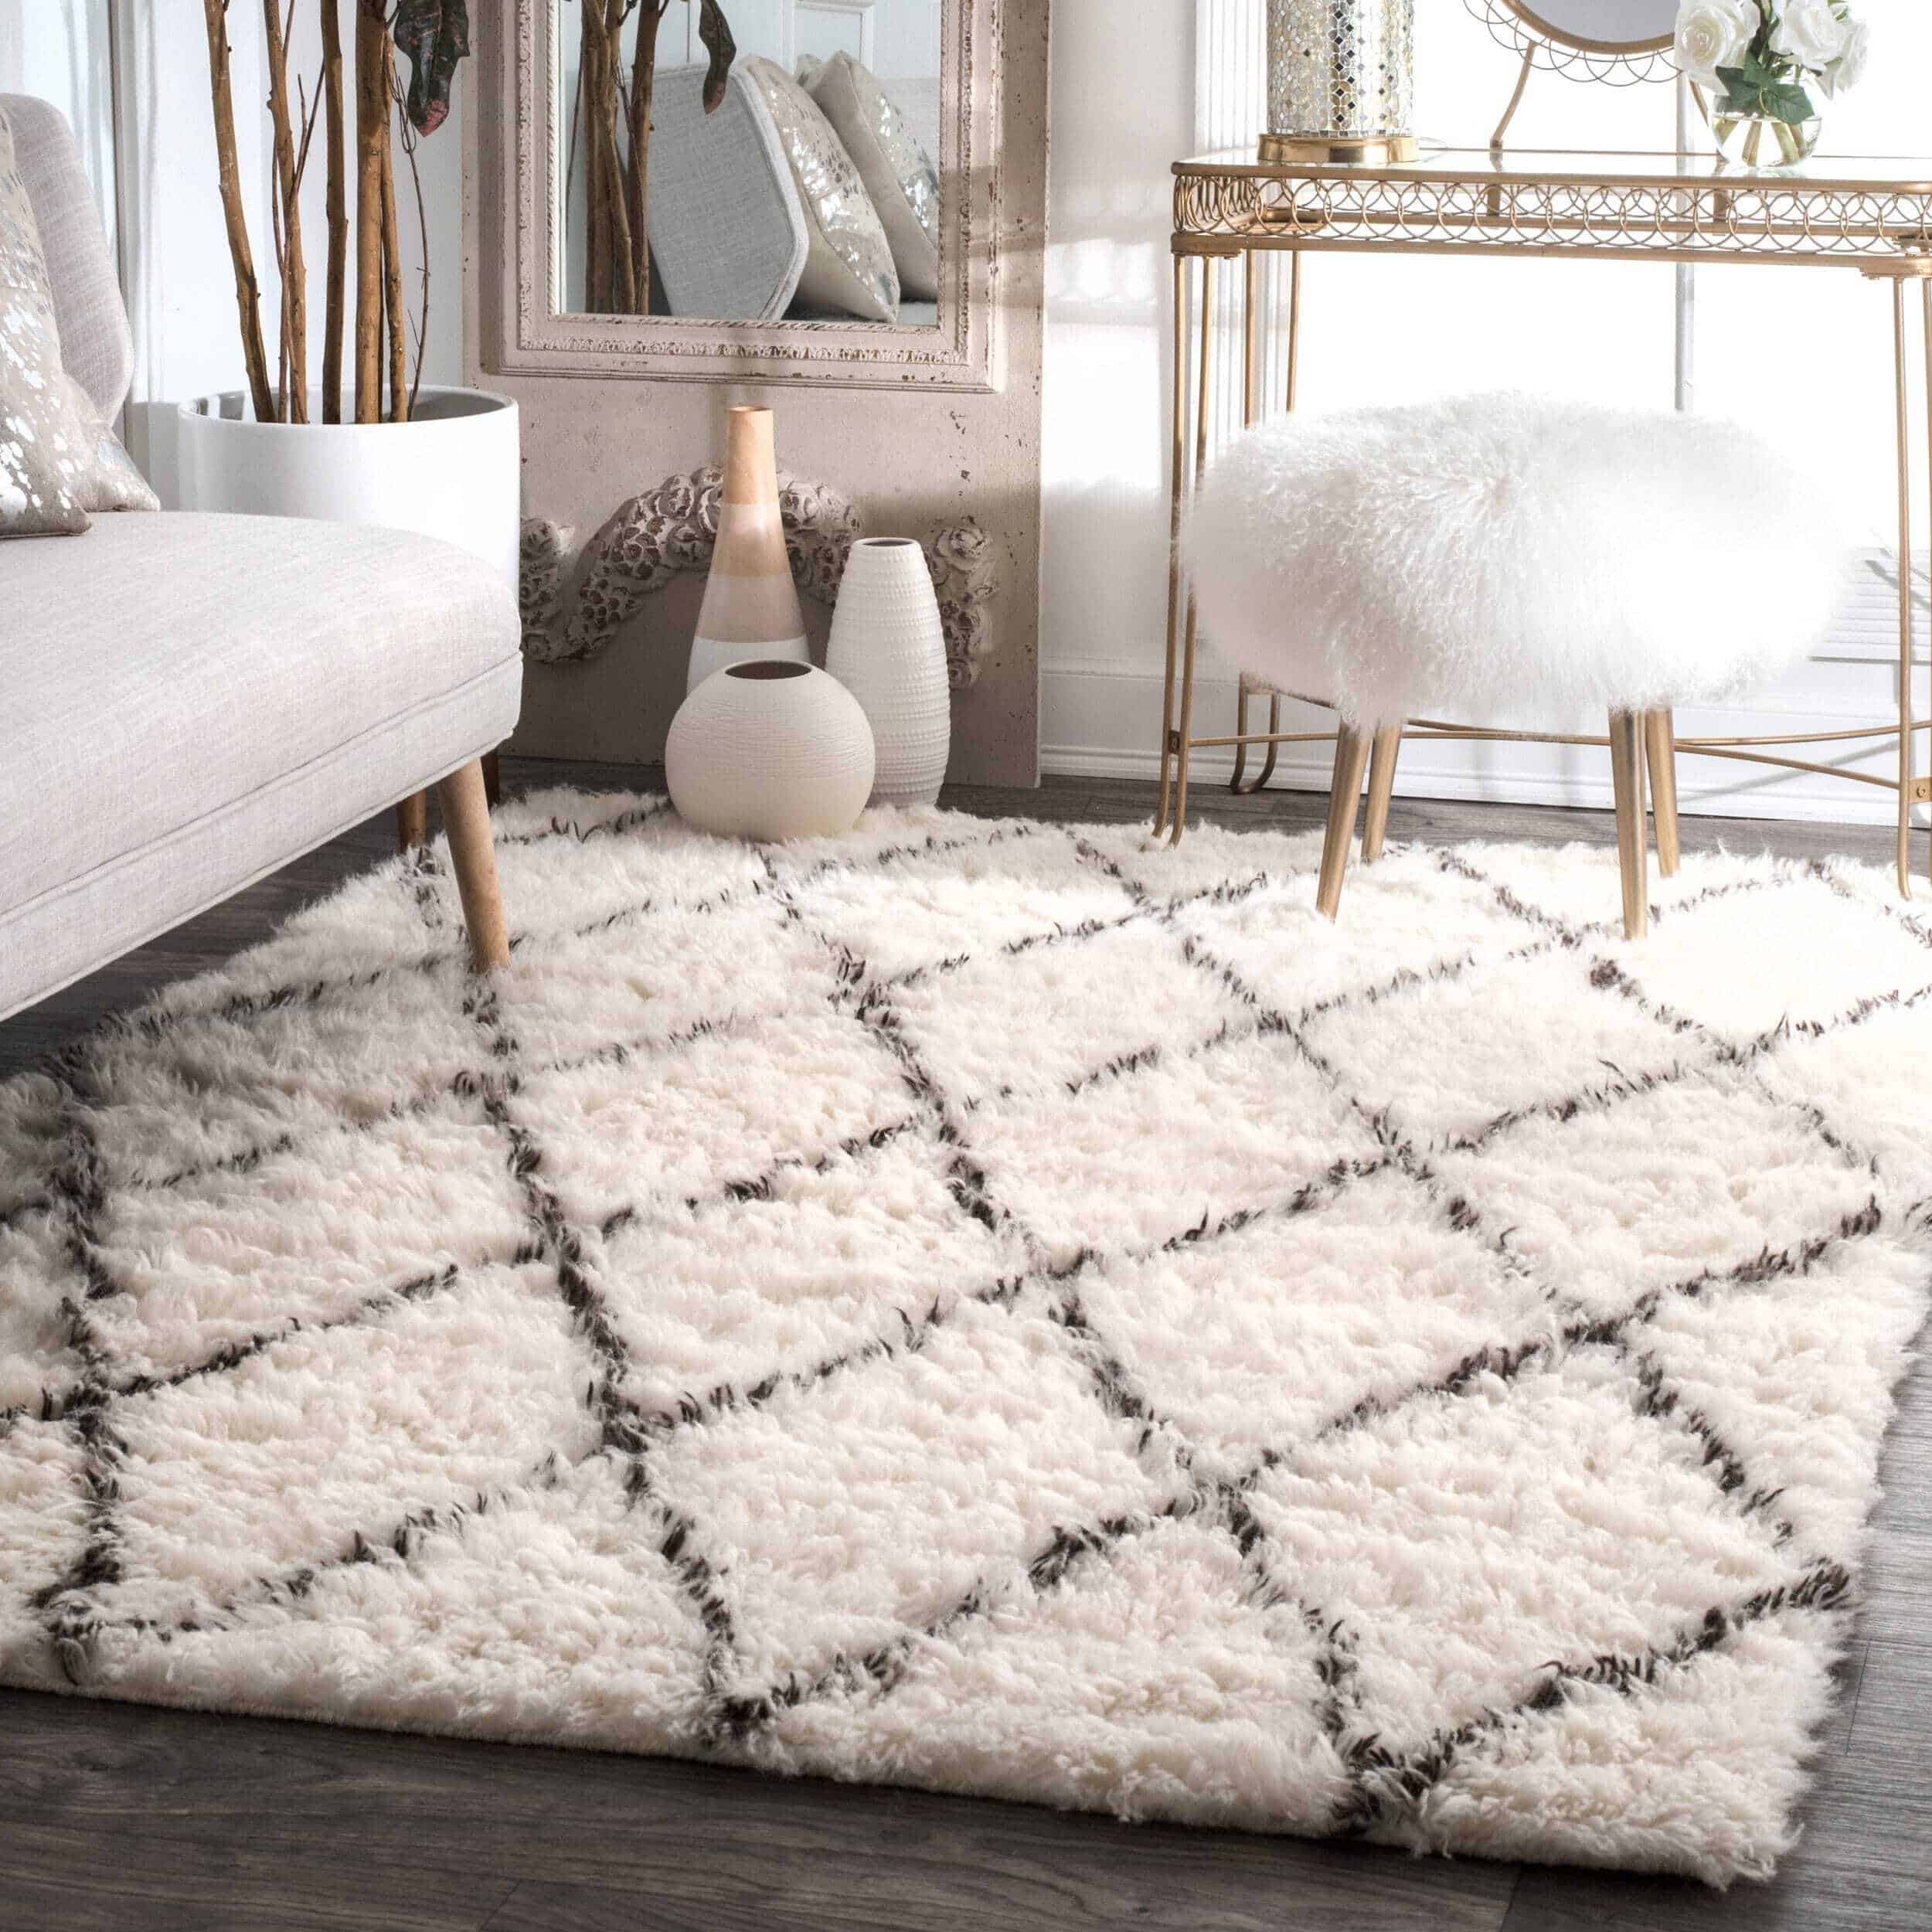 nuLoom Handmade Moroccan style New Zealand Wool Shag Rug. Patterns and Textures are one of the newest rug trends.